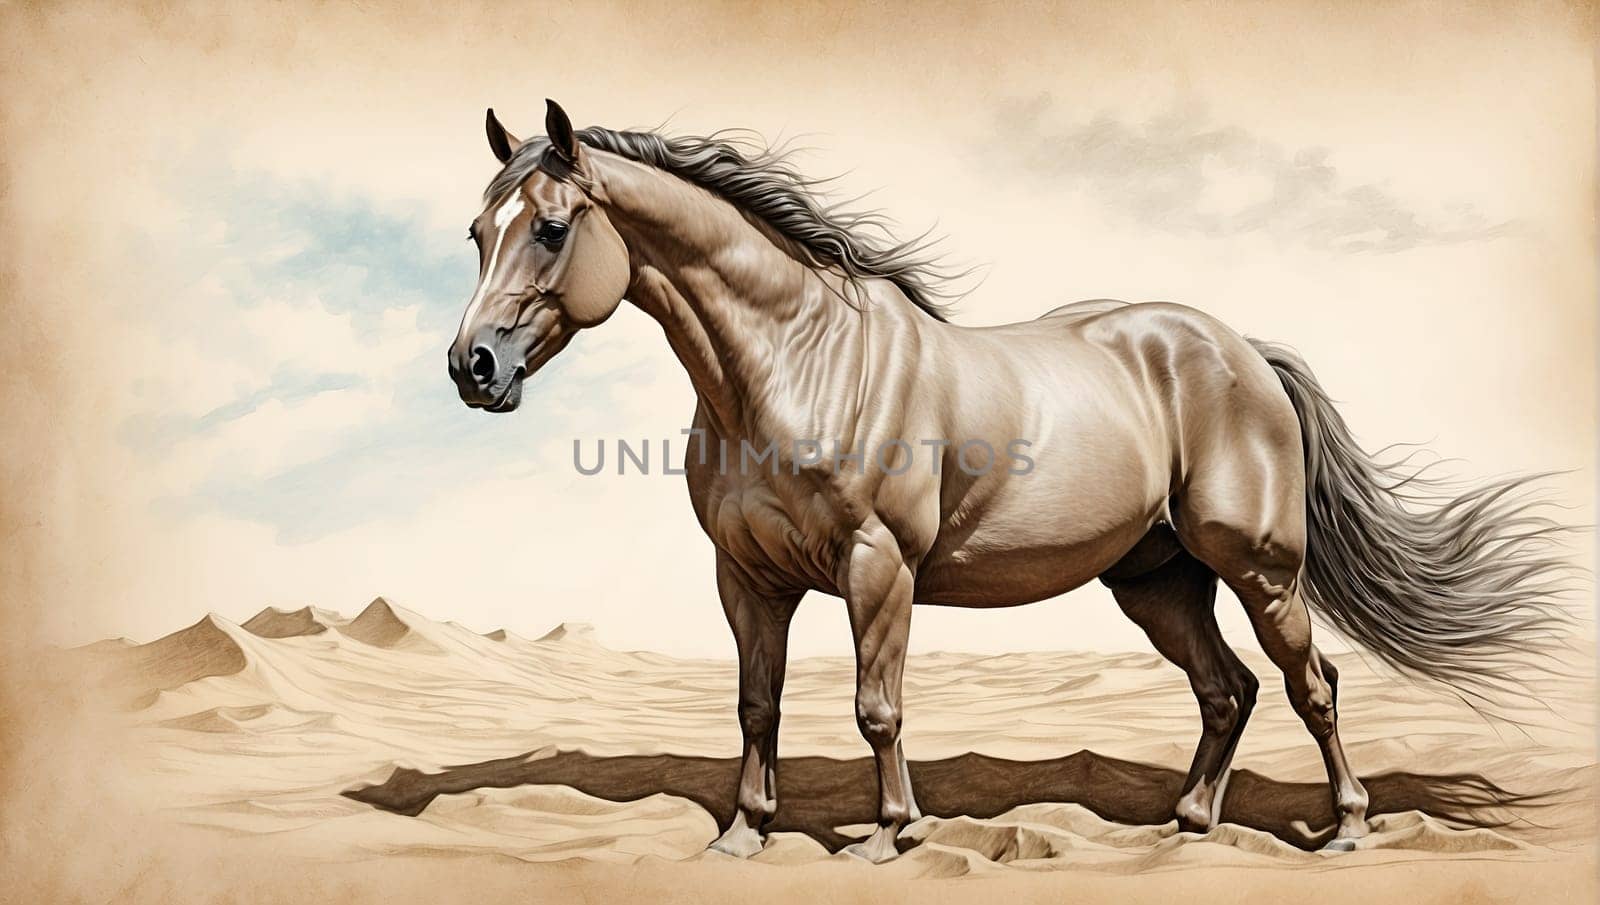 A realistic painting of a horse standing stoically in a vast desert landscape.